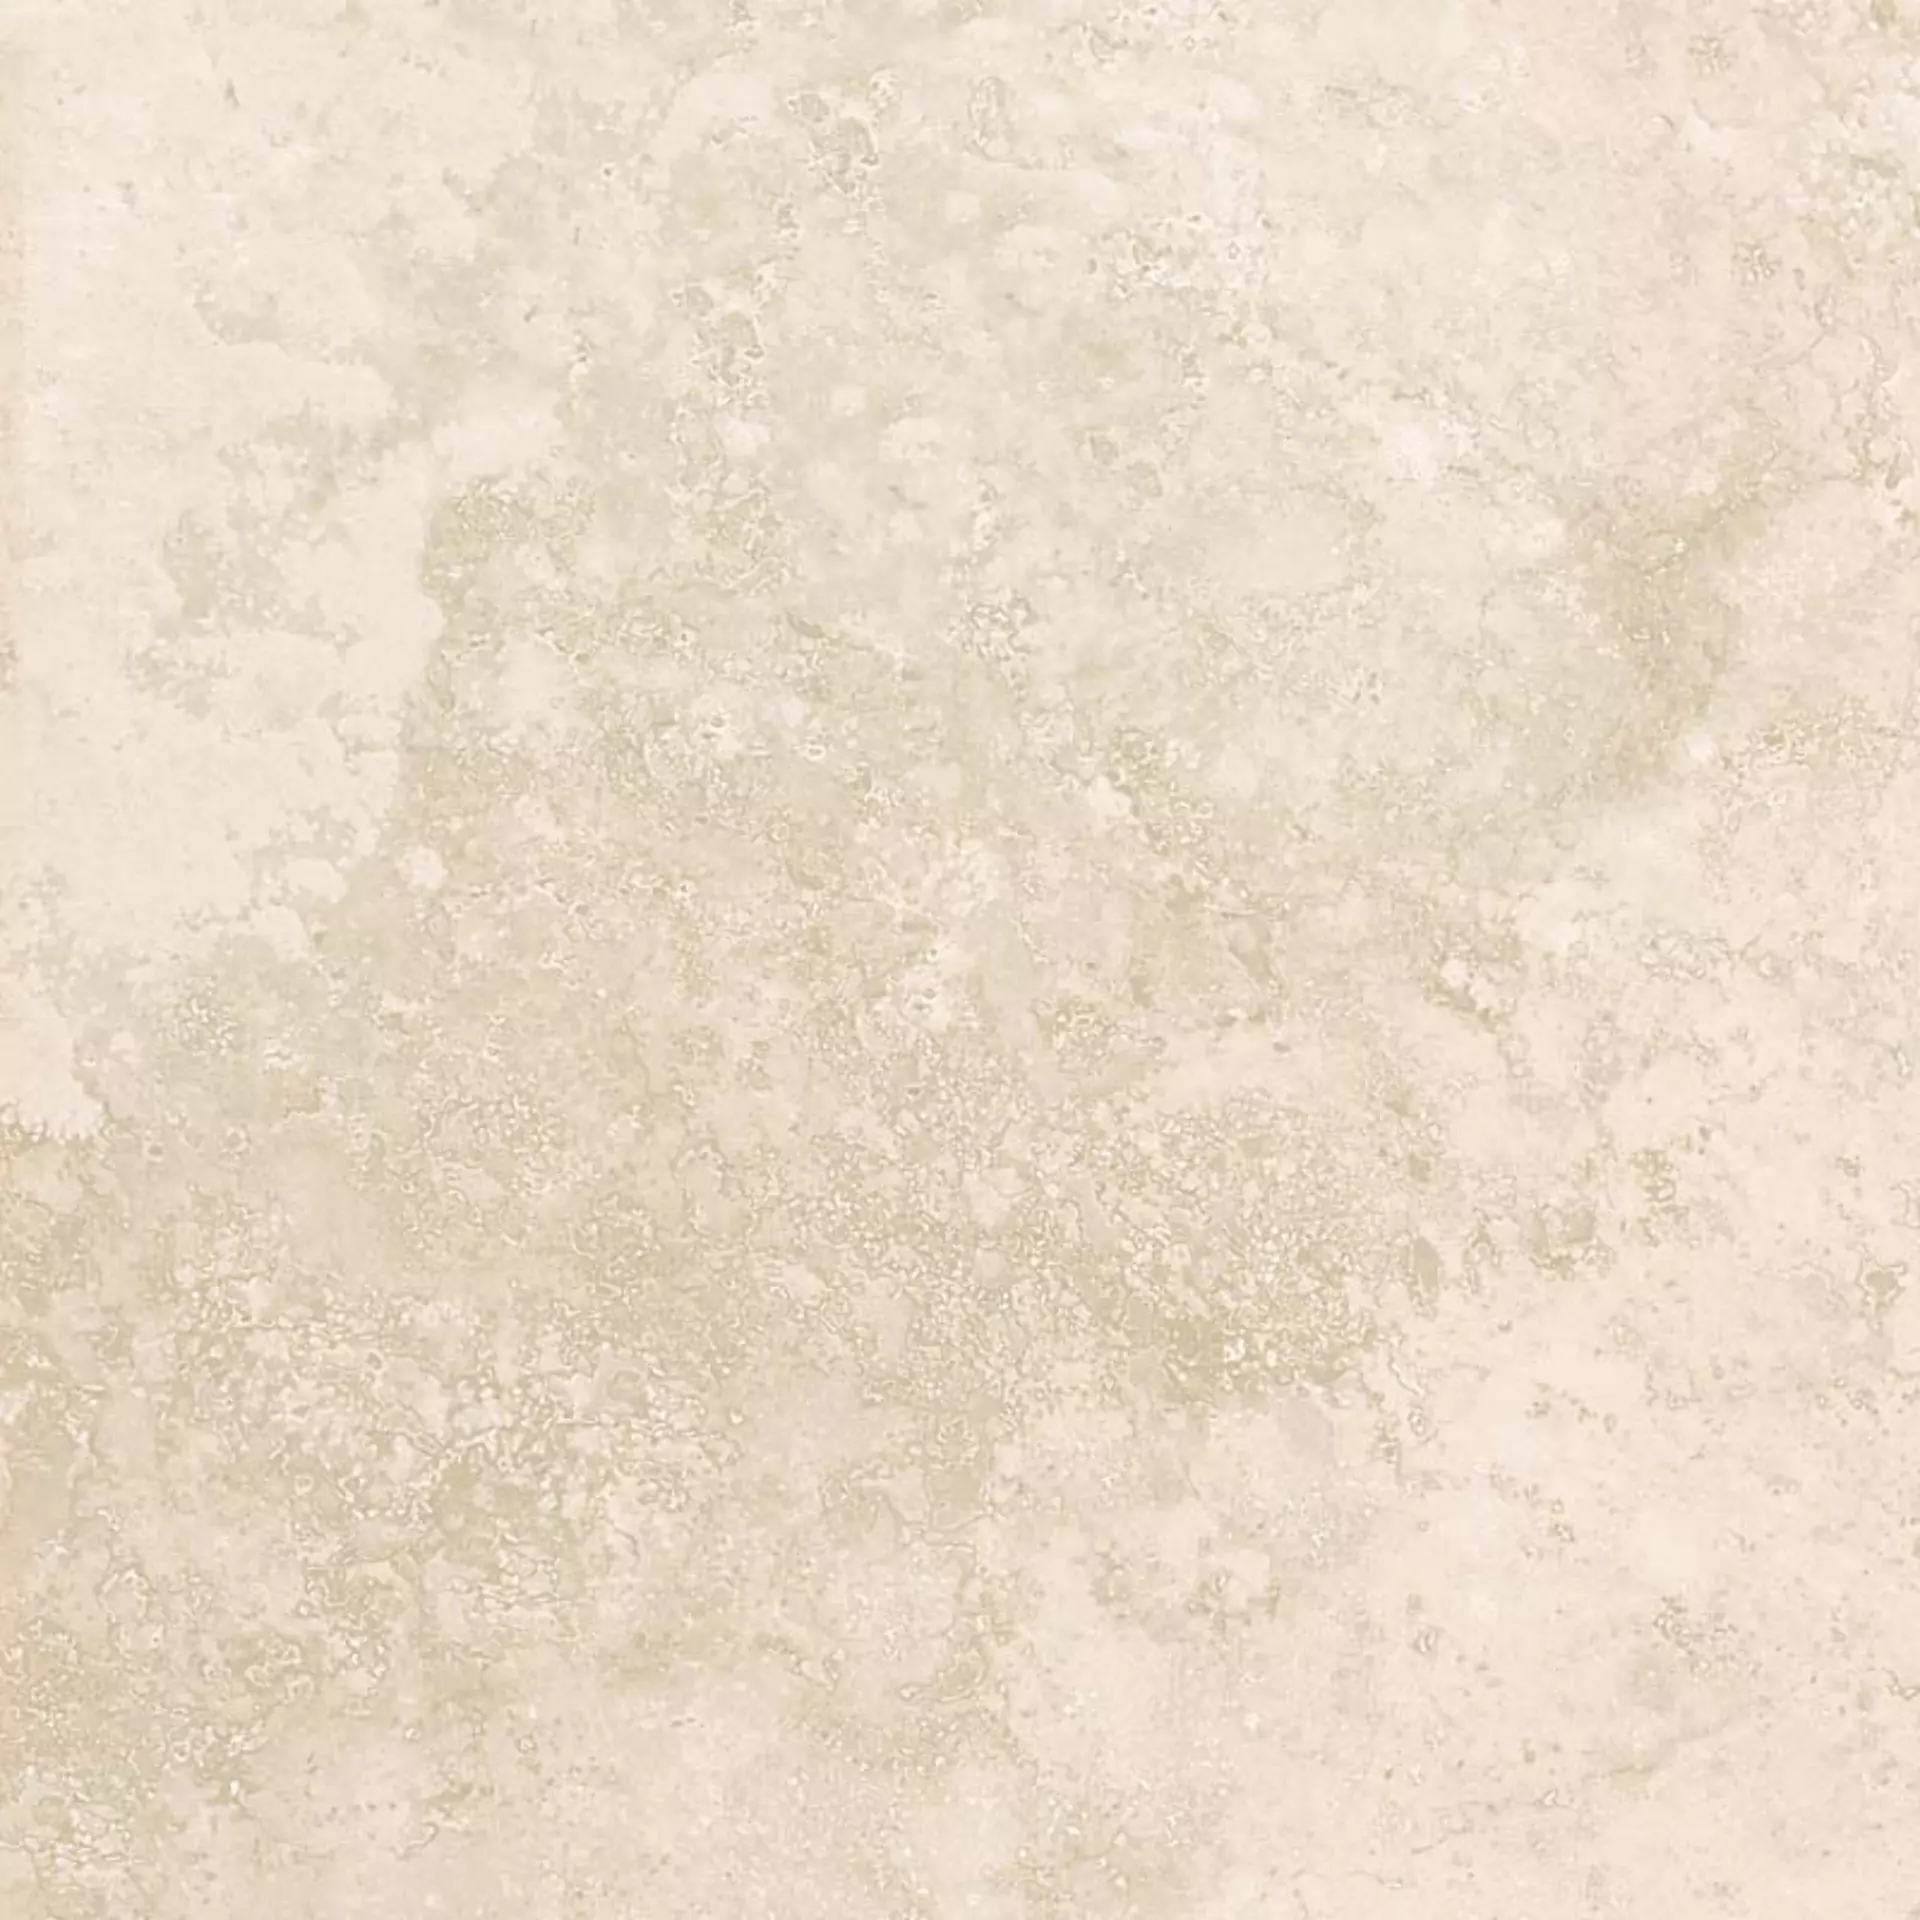 Sant Agostino Via Appia Beige Natural CSAACCBE60 60x60cm rectified 10mm